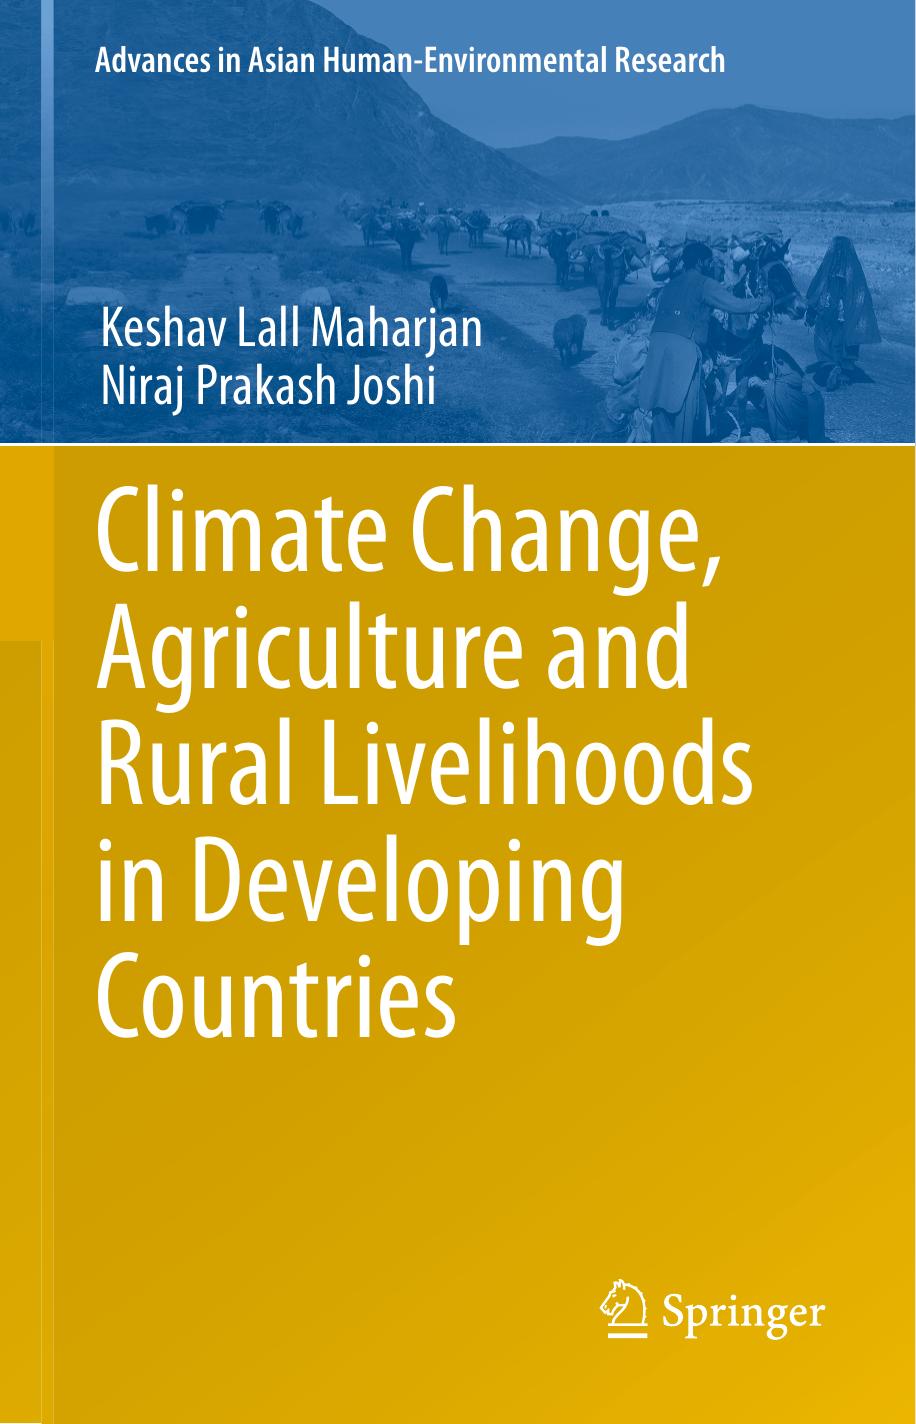 Climate Change, Agriculture and Rural Livelihoods in Developing Countries 2013